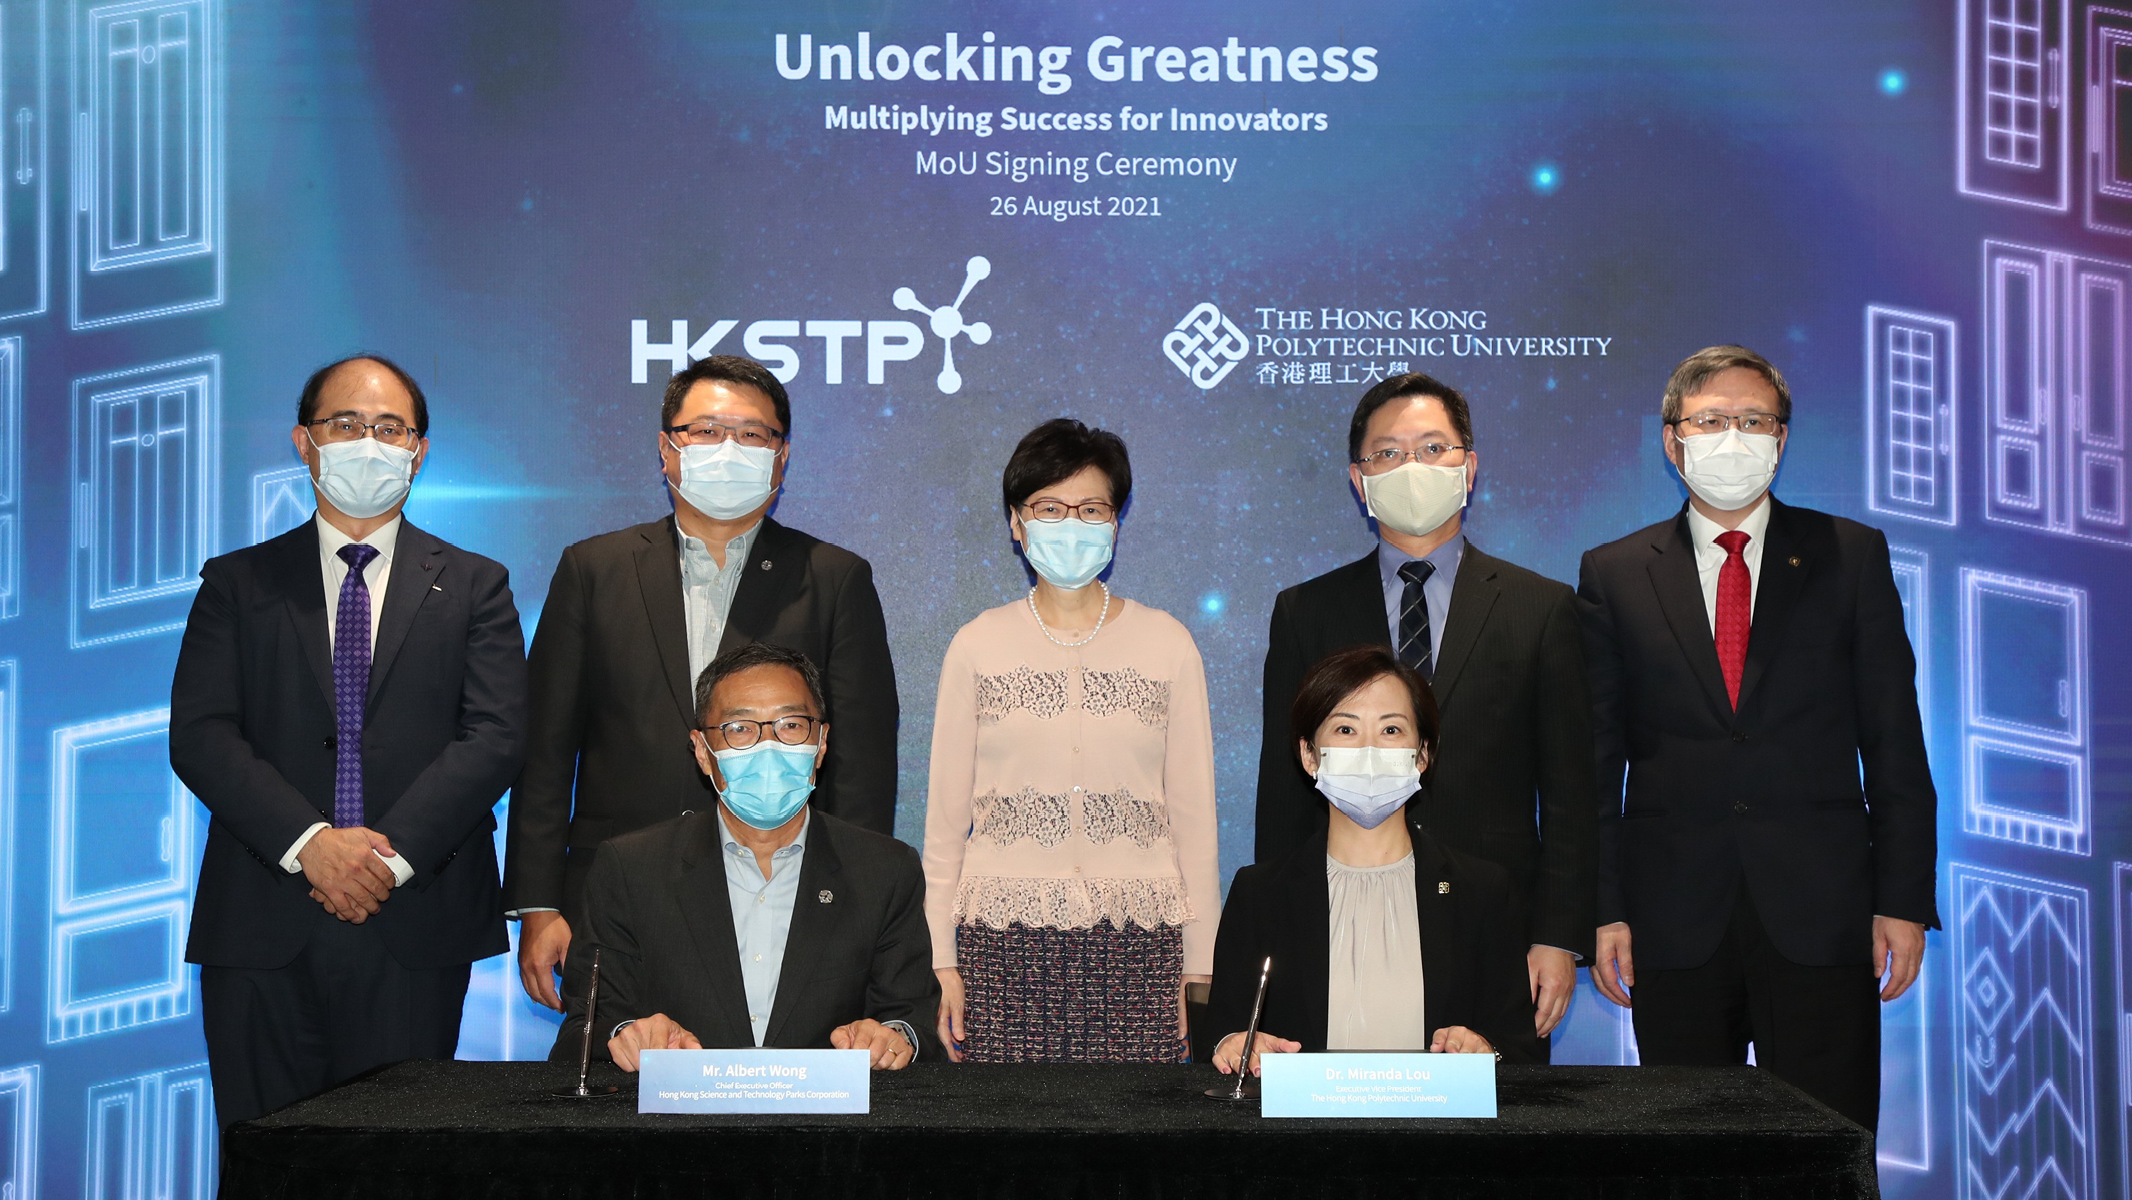 Dr Miranda Lou, Executive Vice President of PolyU (front row, right), and Mr Albert Wong, CEO of HKSTP (front row, left) signed an MOU to form a joint GBA-focused entrepreneurship programme to nurture young R&D talent to become tech entrepreneurs. The signing was witnessed by Mrs Carrie Lam, Chief Executive of HKSAR (back row, middle); Mr Alfred Sit, Secretary for Innovation and Technology (back row, second from right); Dr Sunny Chai, Chairman of HKSTP (back row, second from left); Professor Jin-Guang Teng, President of PolyU (back row, right) and Professor Wing-tak Wong, Deputy President and Provost of PolyU (back row, left).